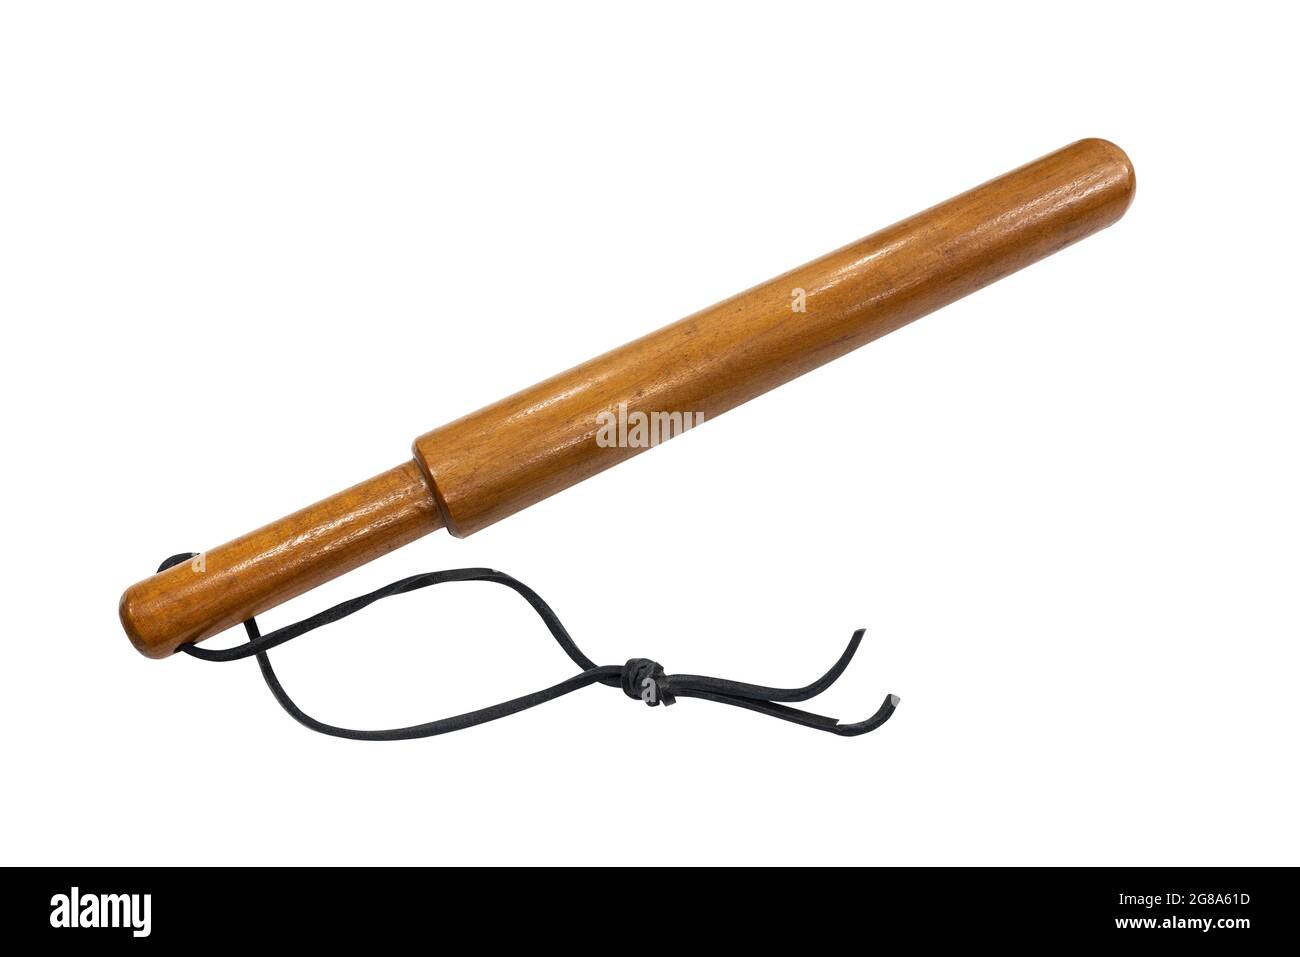 Antique wood truncheon club from the 1920s isolated on white. Stock Photo